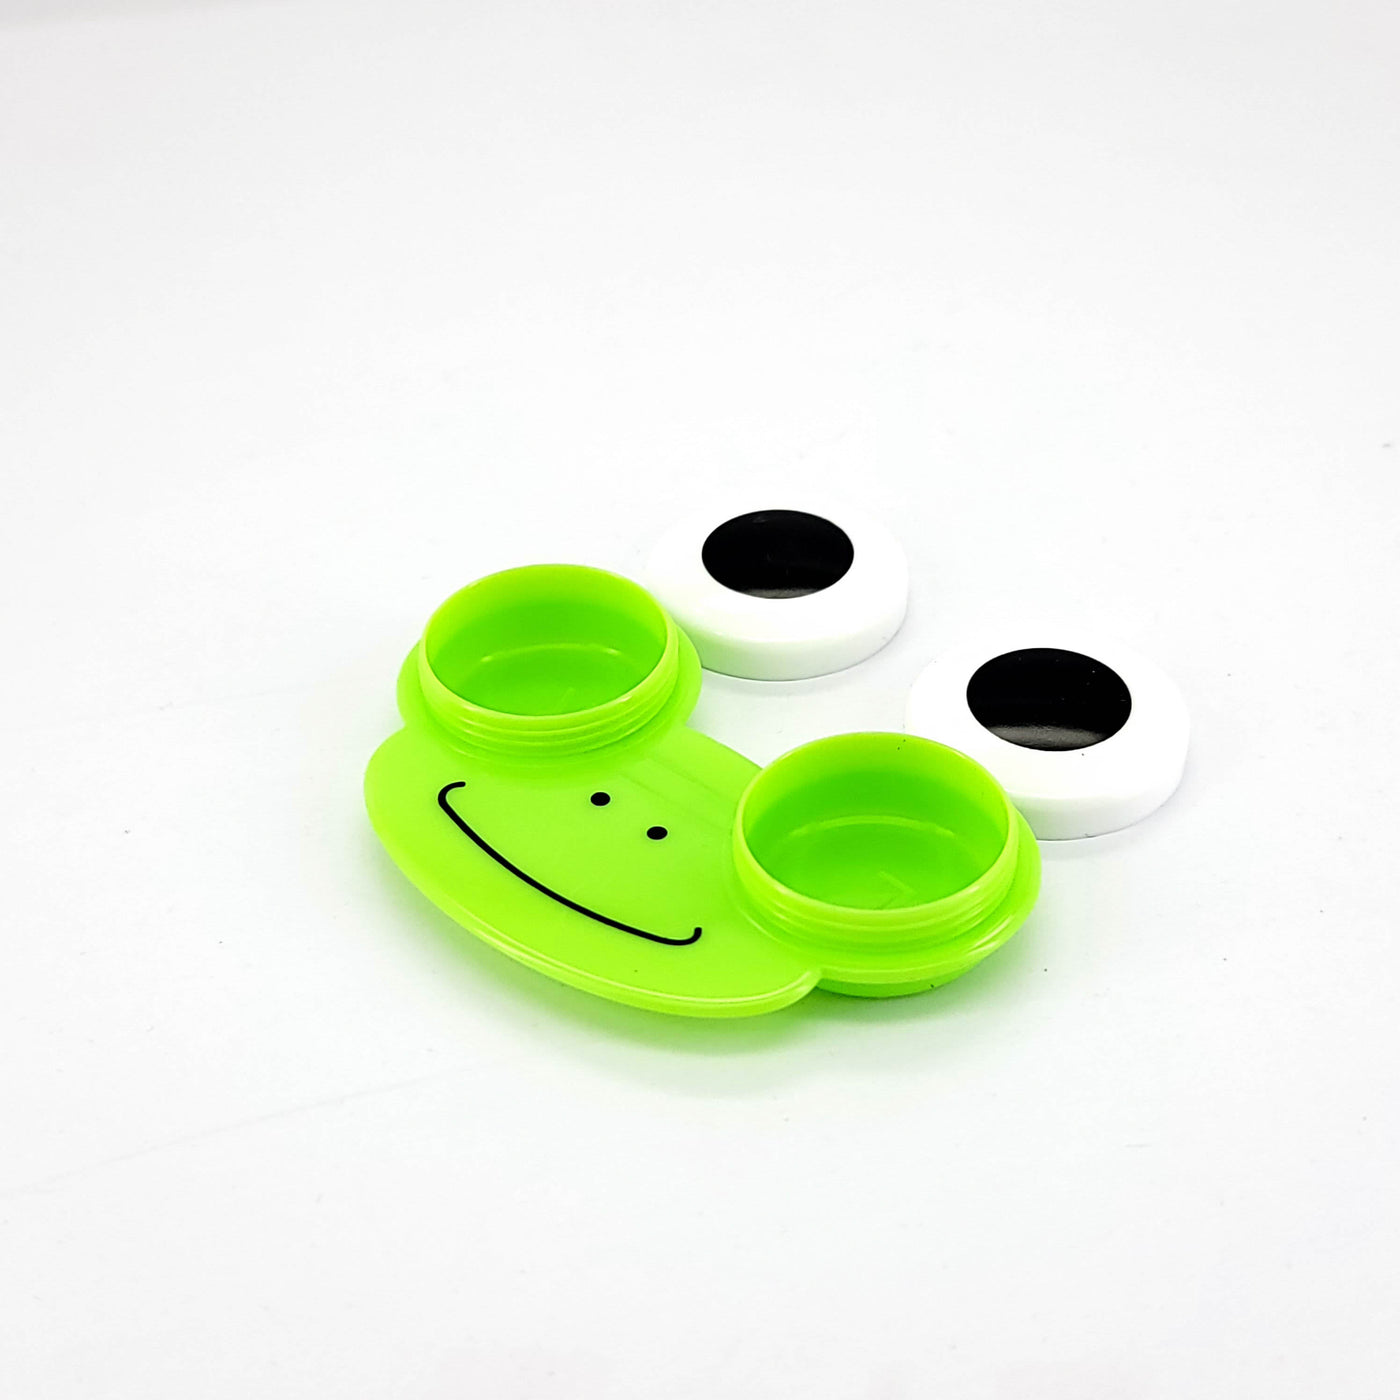 Wildlife Contact Lens Case | Accessories - Vision Express Optical Philippines